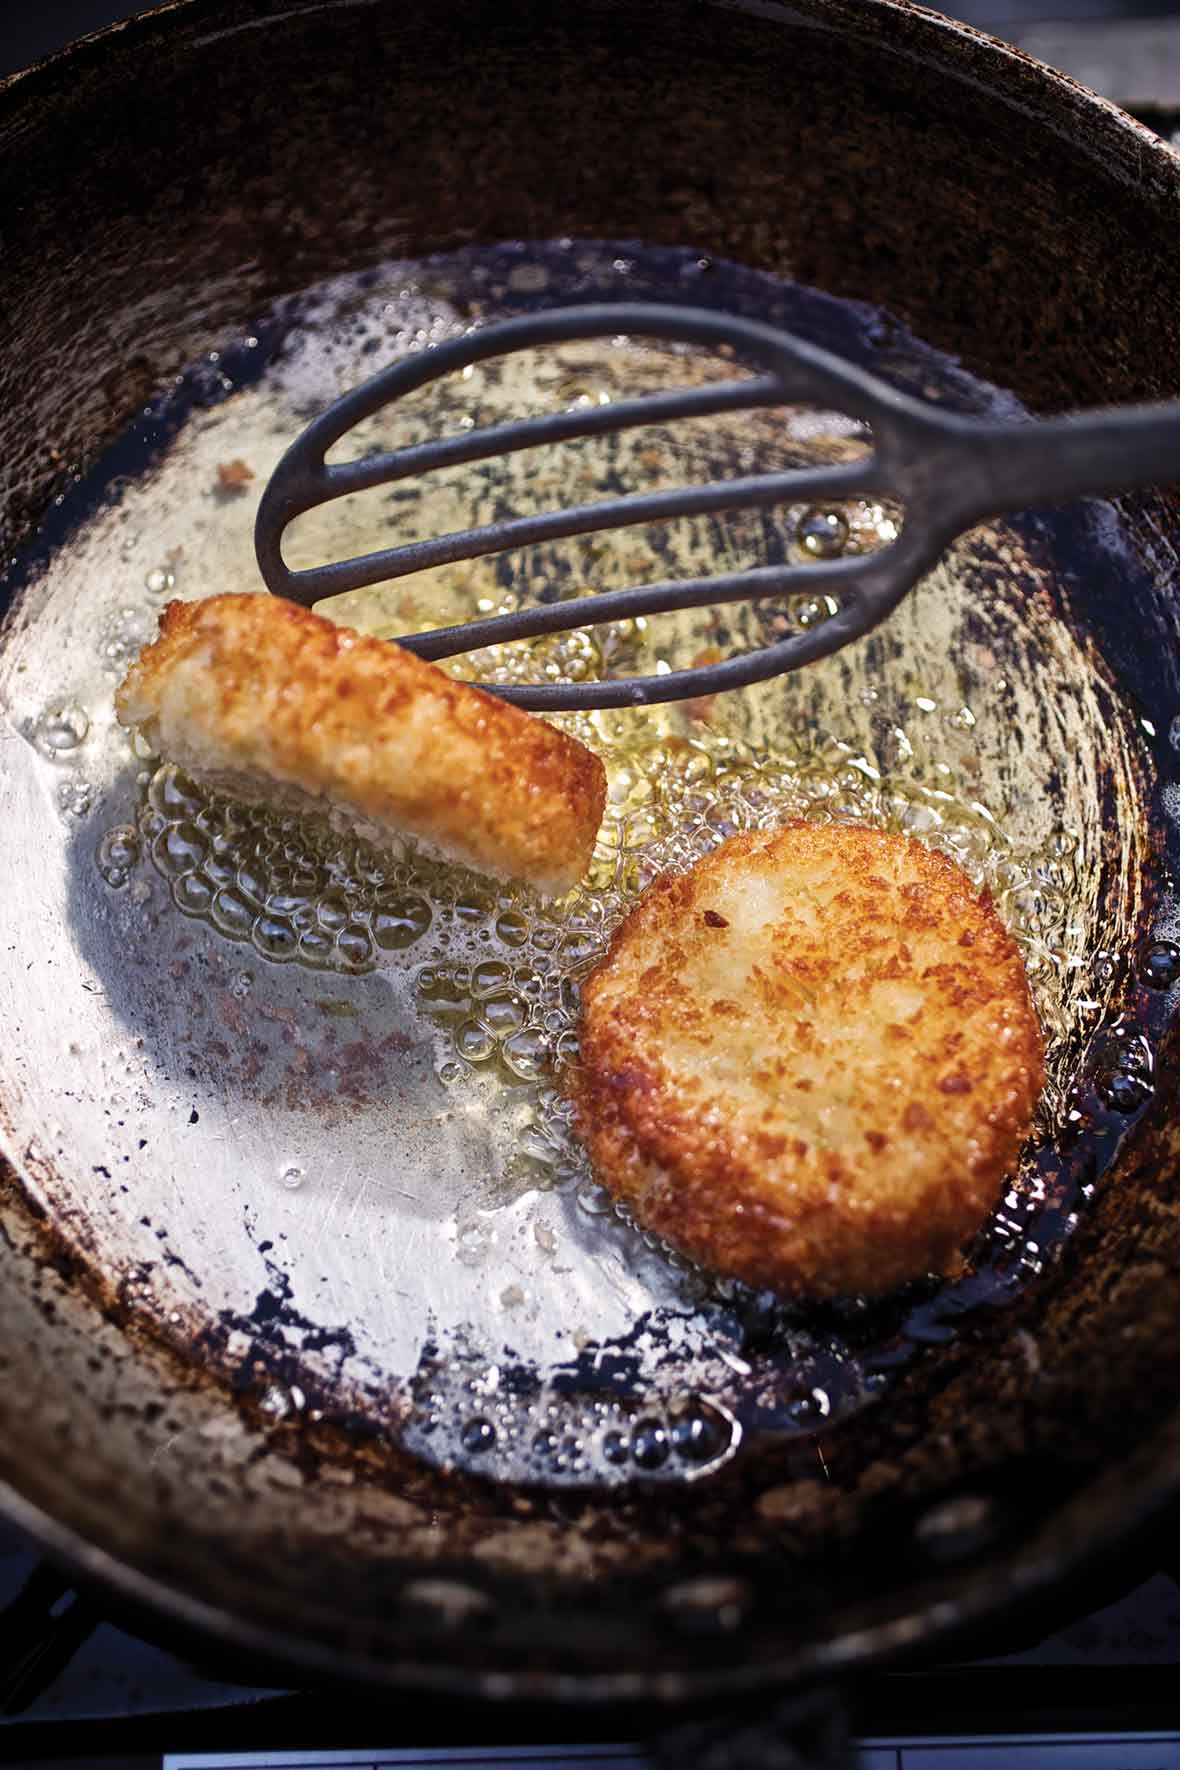 Old frying pan with two leftover mashed potato cakes being turned by a spatula